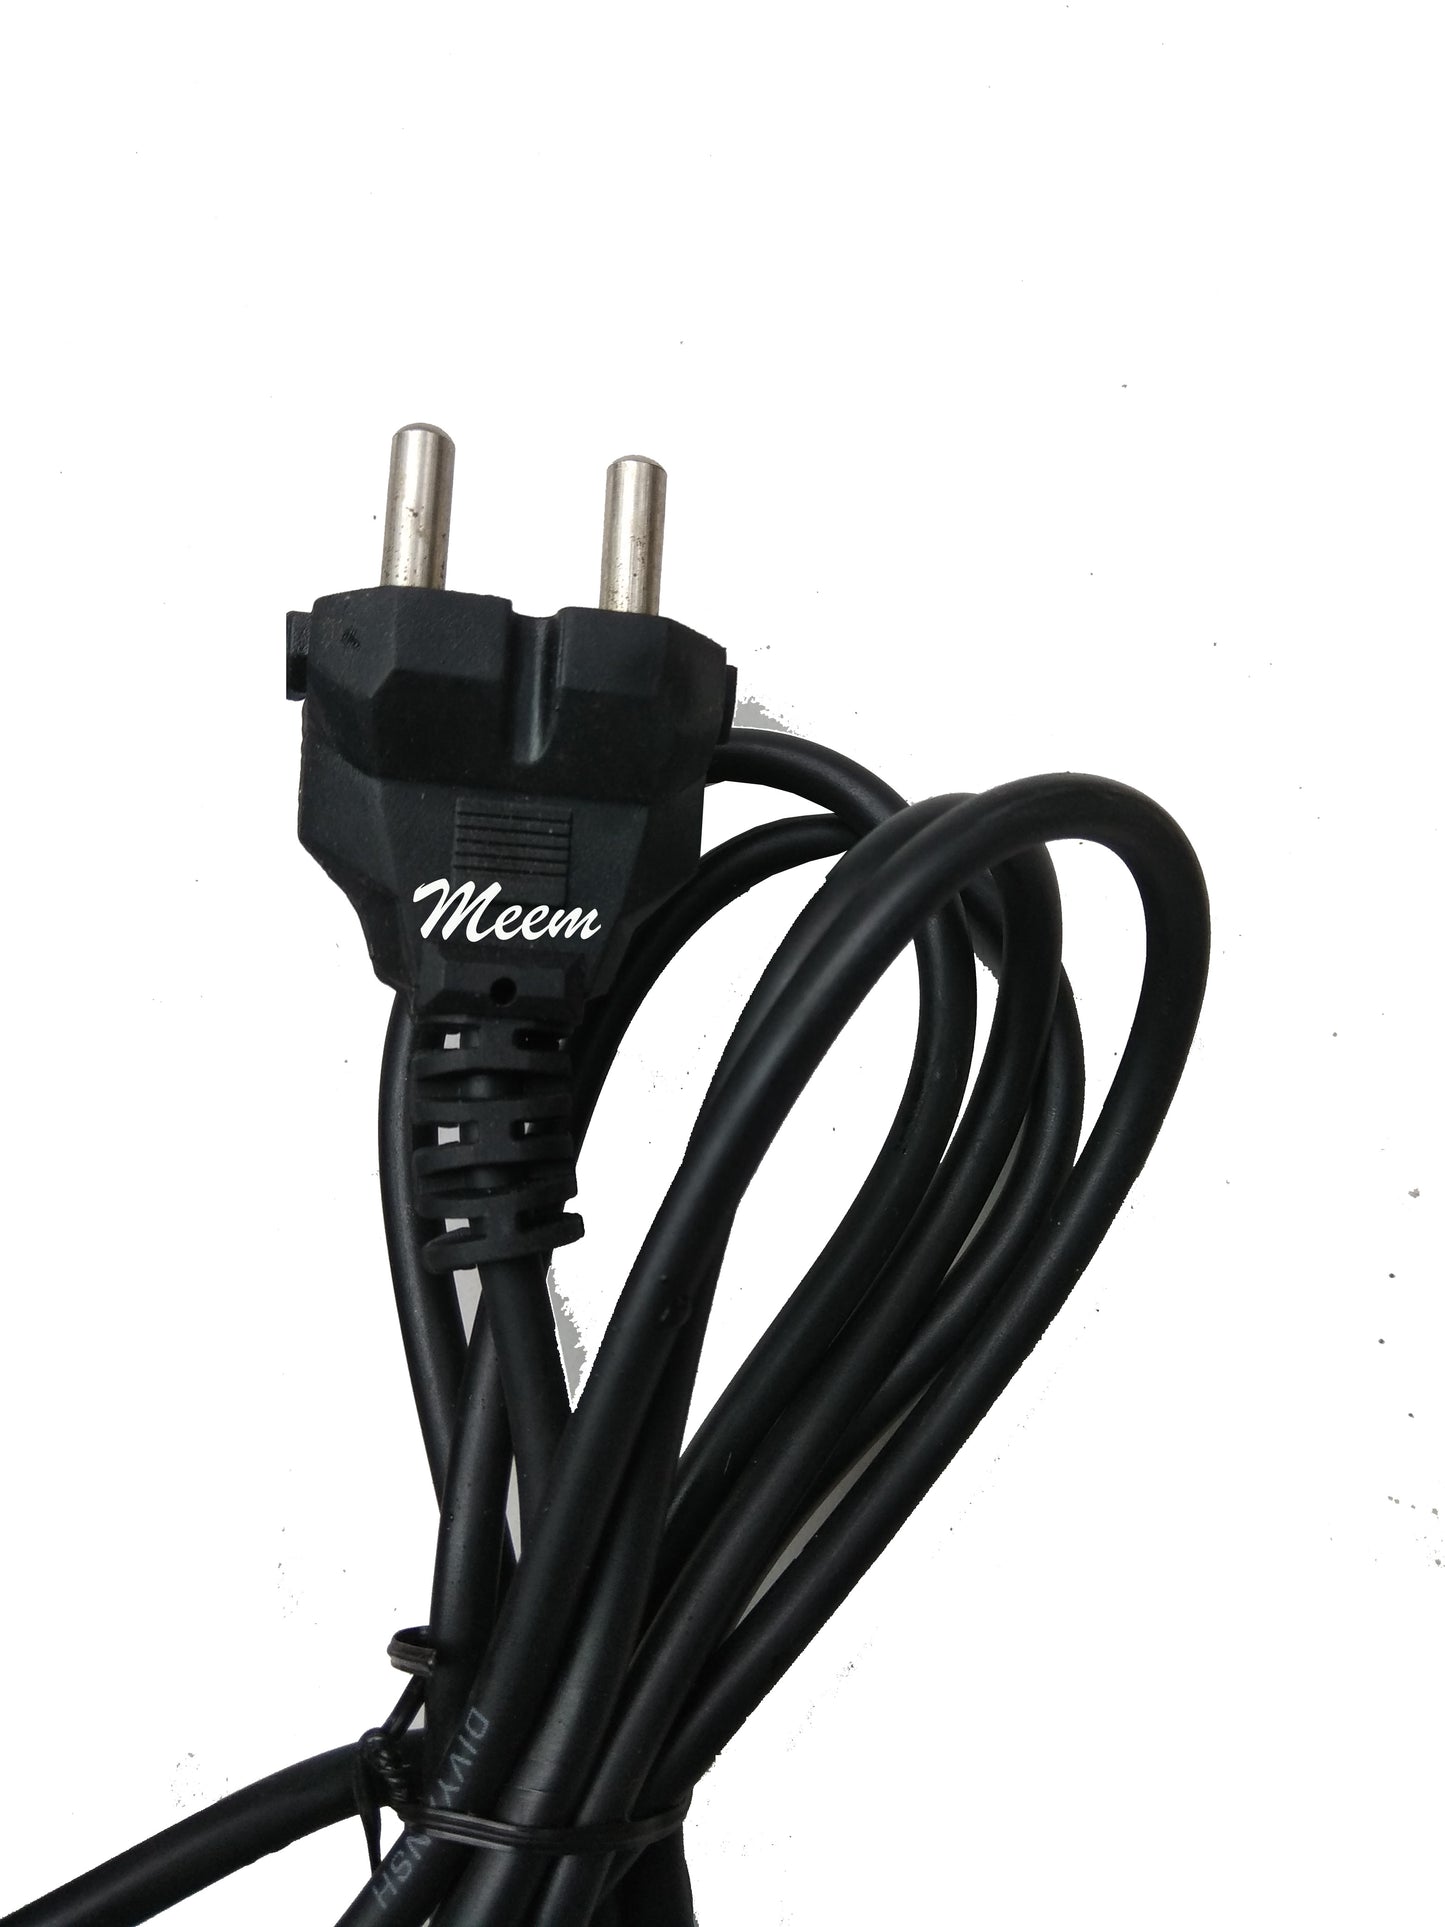 Powersupply Adapter transformer Model 24Volt 1.2A suitable for All R.O Water Purifier